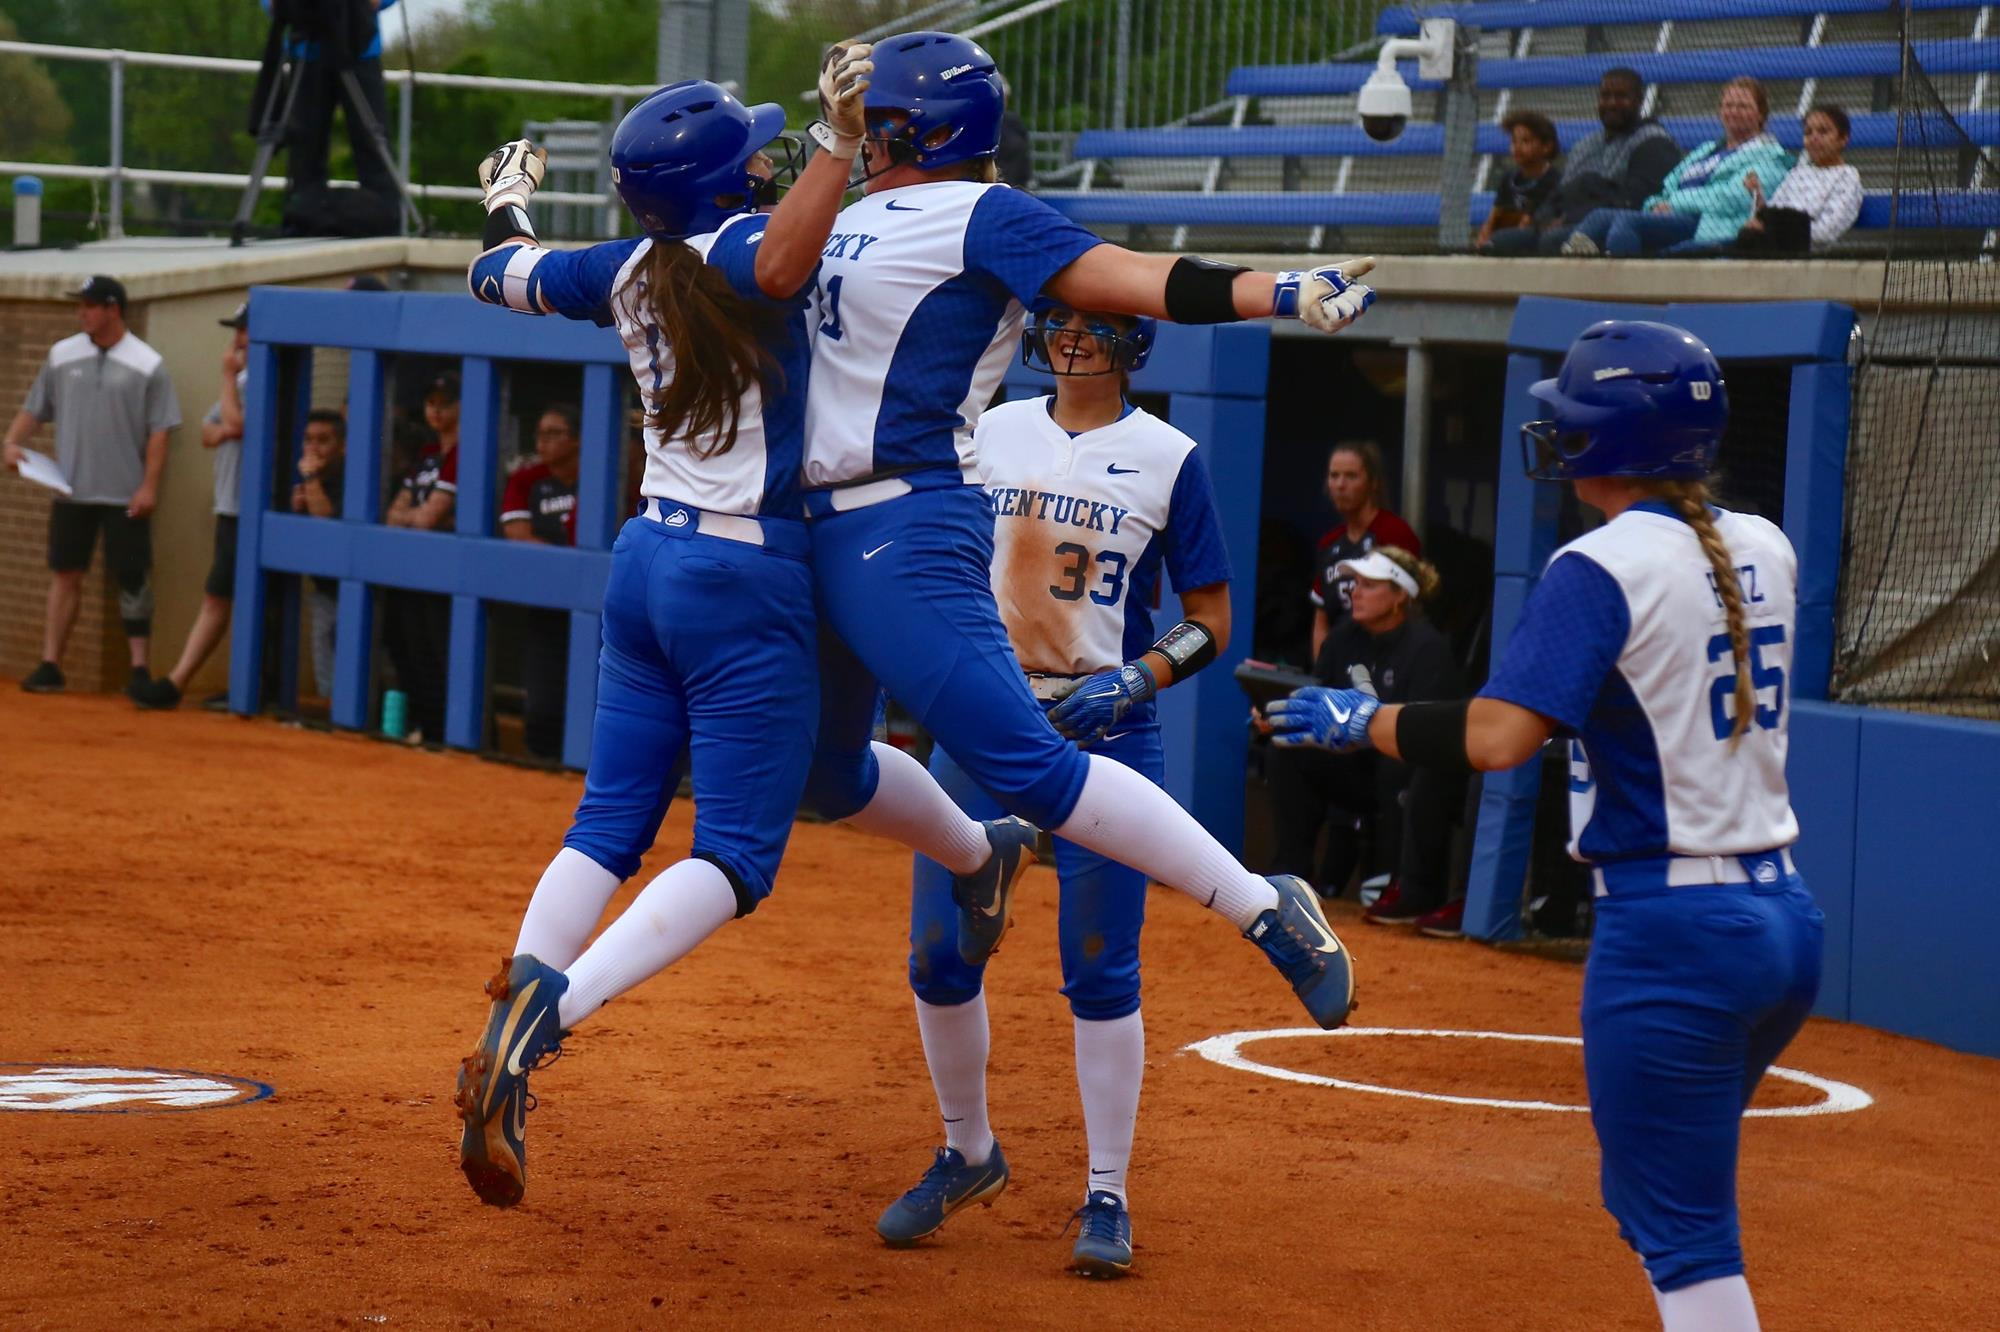 Peyton’s First-Inning Grand Slam Sparks No. 19 UK to 7-5 Win